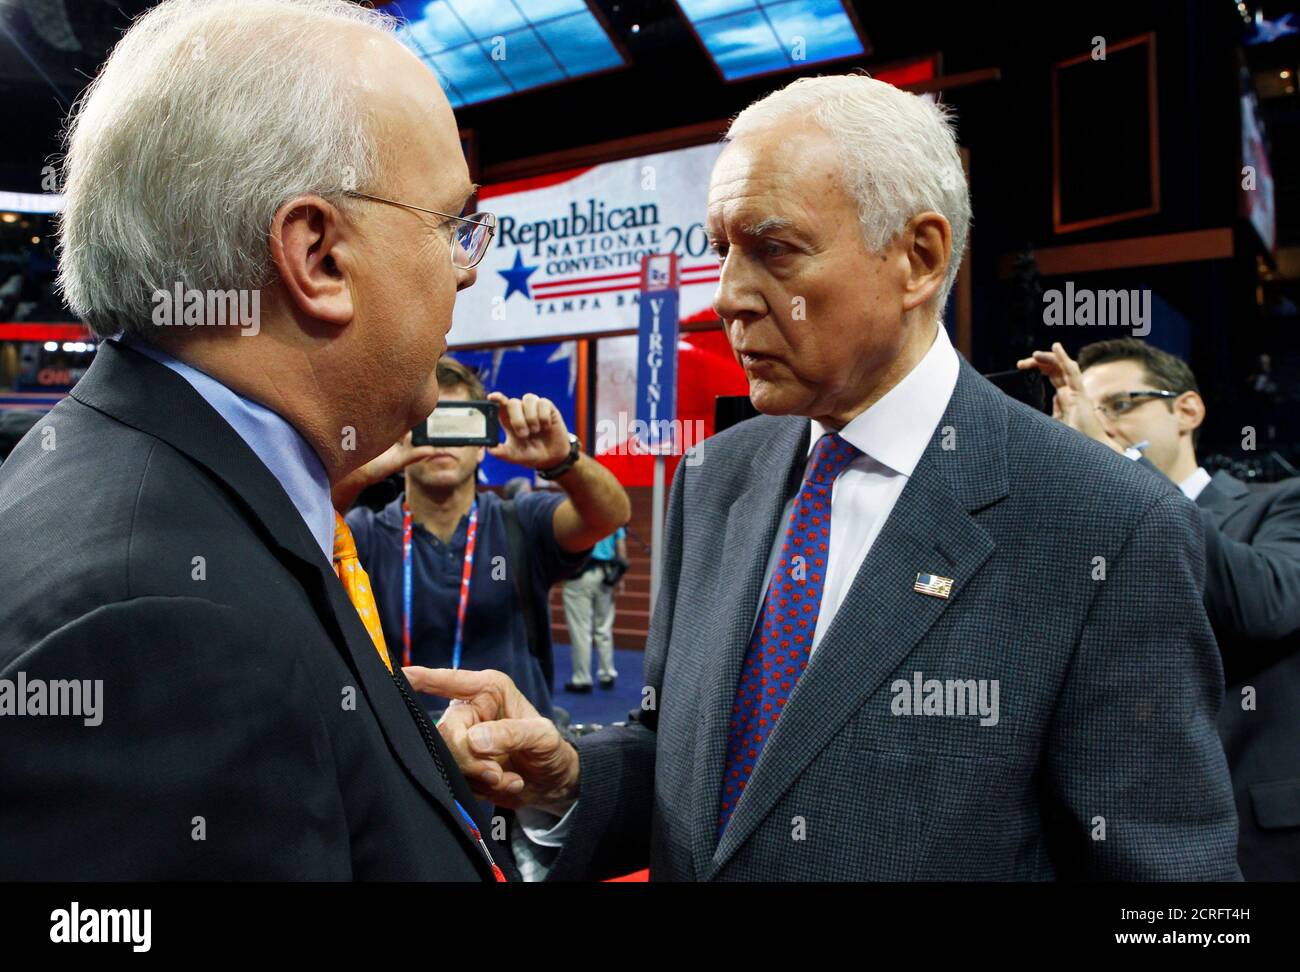 MSG: Republican political strategist Karl Rove (L) talks with U.S. Senator Orin Hatch (R-UT) on the floor of the Republican National Convention before the start of the opening session in Tampa, Florida August 27, 2012. REUTERS/Jim Bourg (UNITED STATES  - Tags: POLITICS ELECTIONS) Stock Photo